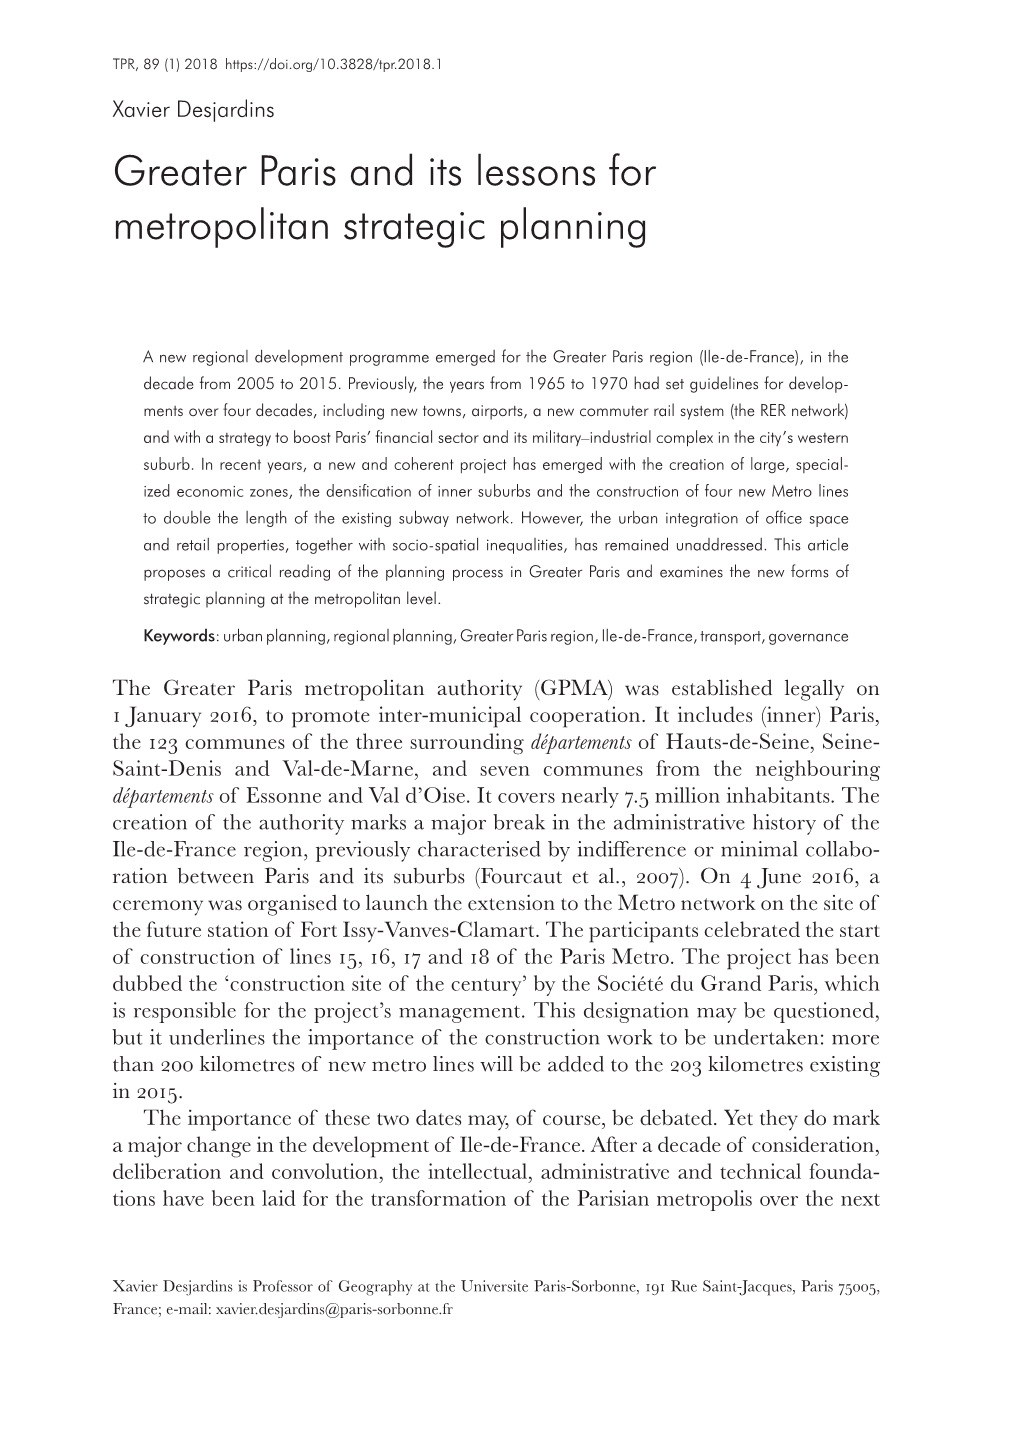 Greater Paris and Its Lessons for Metropolitan Strategic Planning